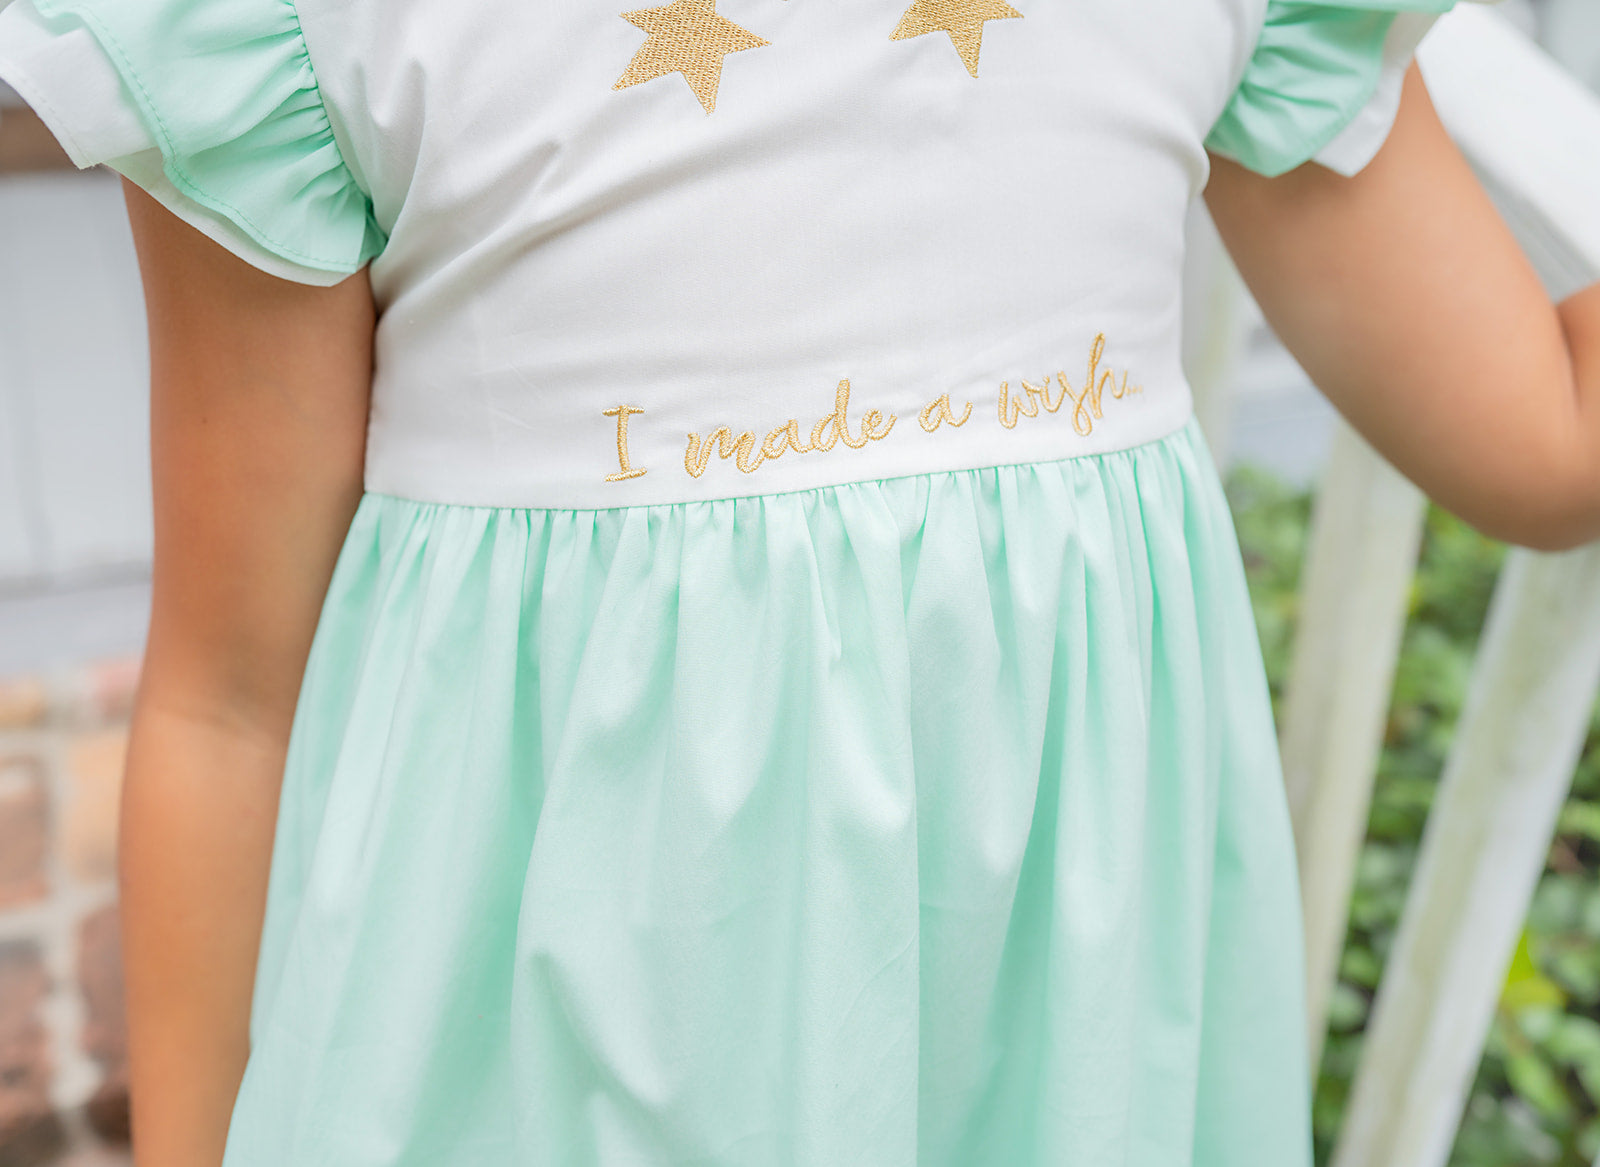 "I Made a Wish" Mint Green Embroidered Dress - Evie's Closet Clothing